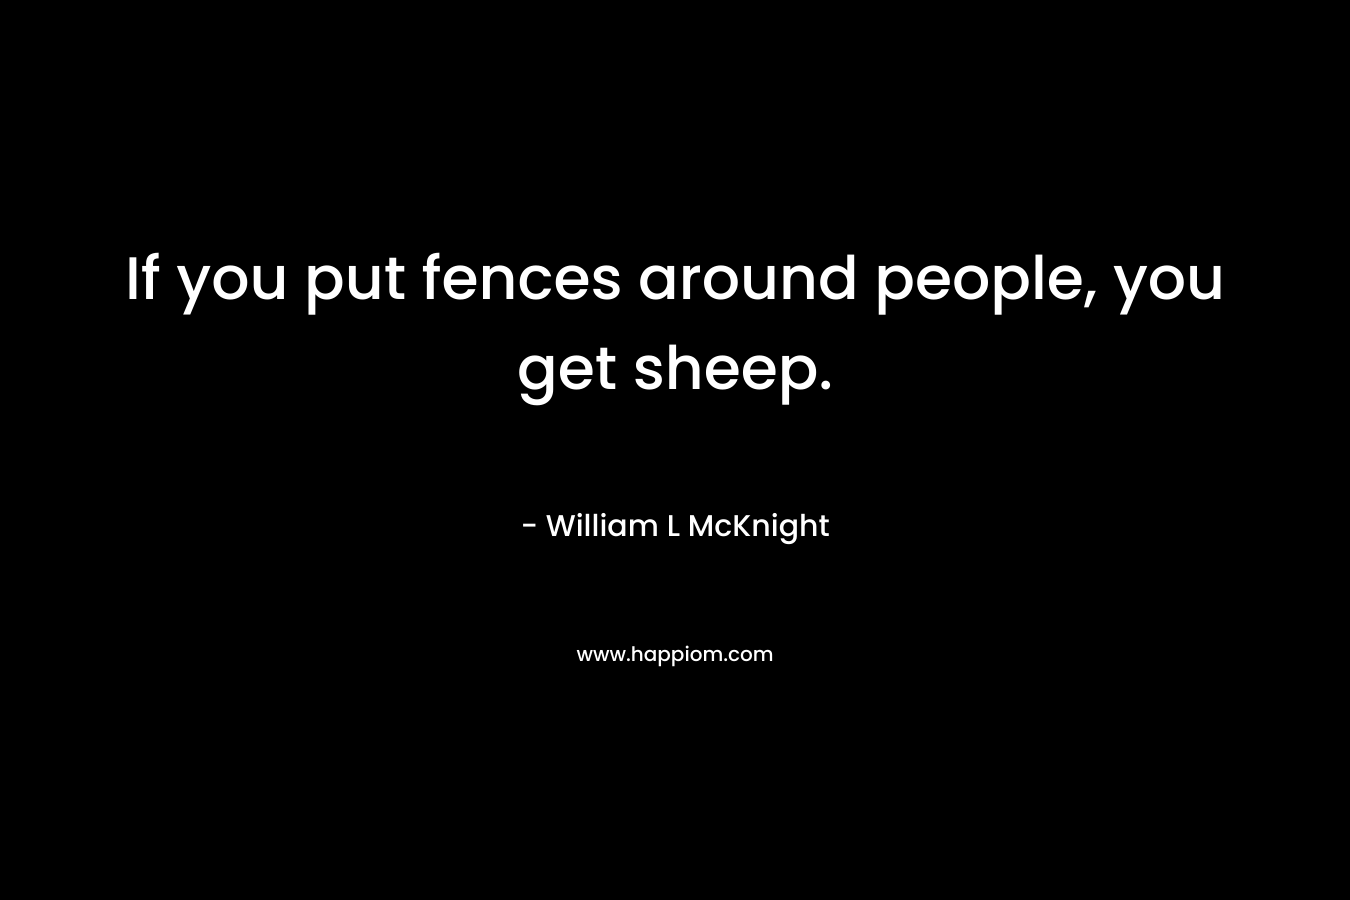 If you put fences around people, you get sheep. – William L McKnight